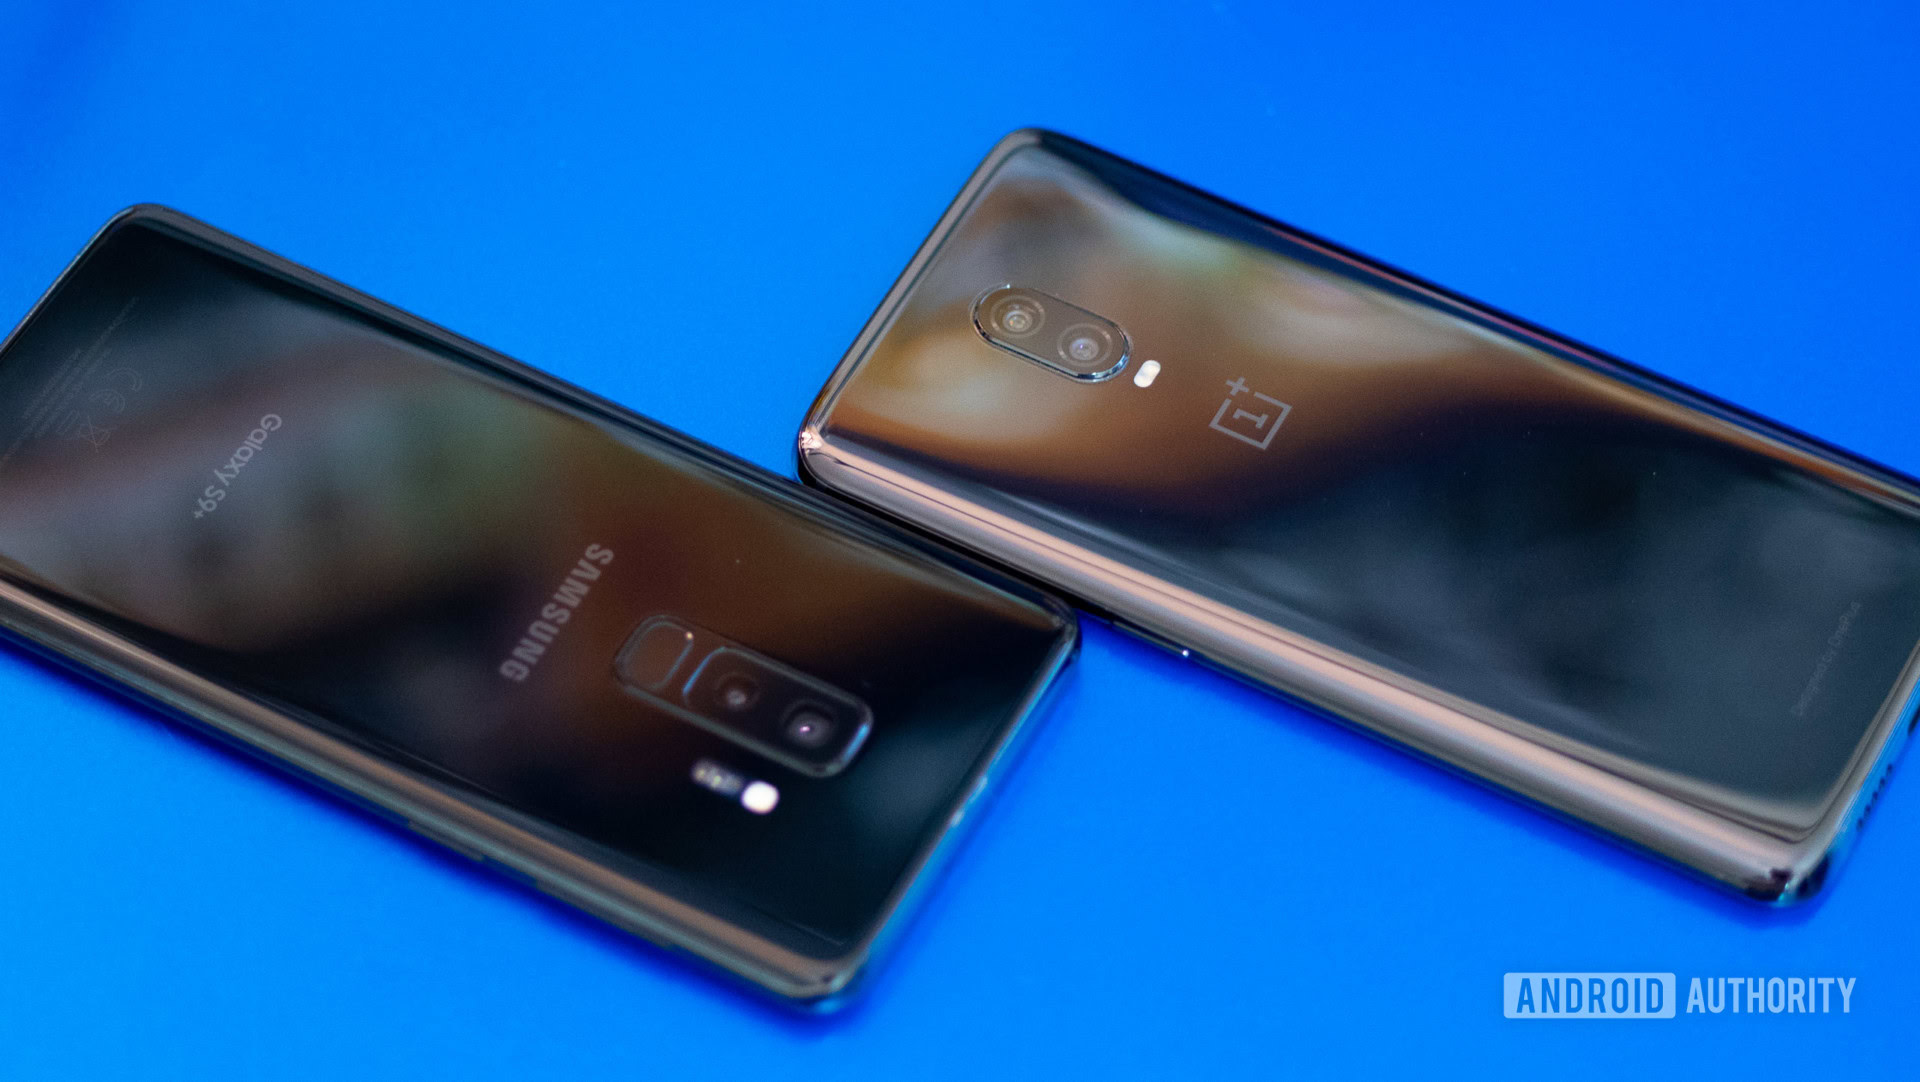 Oneplus 6t Vs Samsung Galaxy S9 Specs Comparison It S Closer Than You D Think